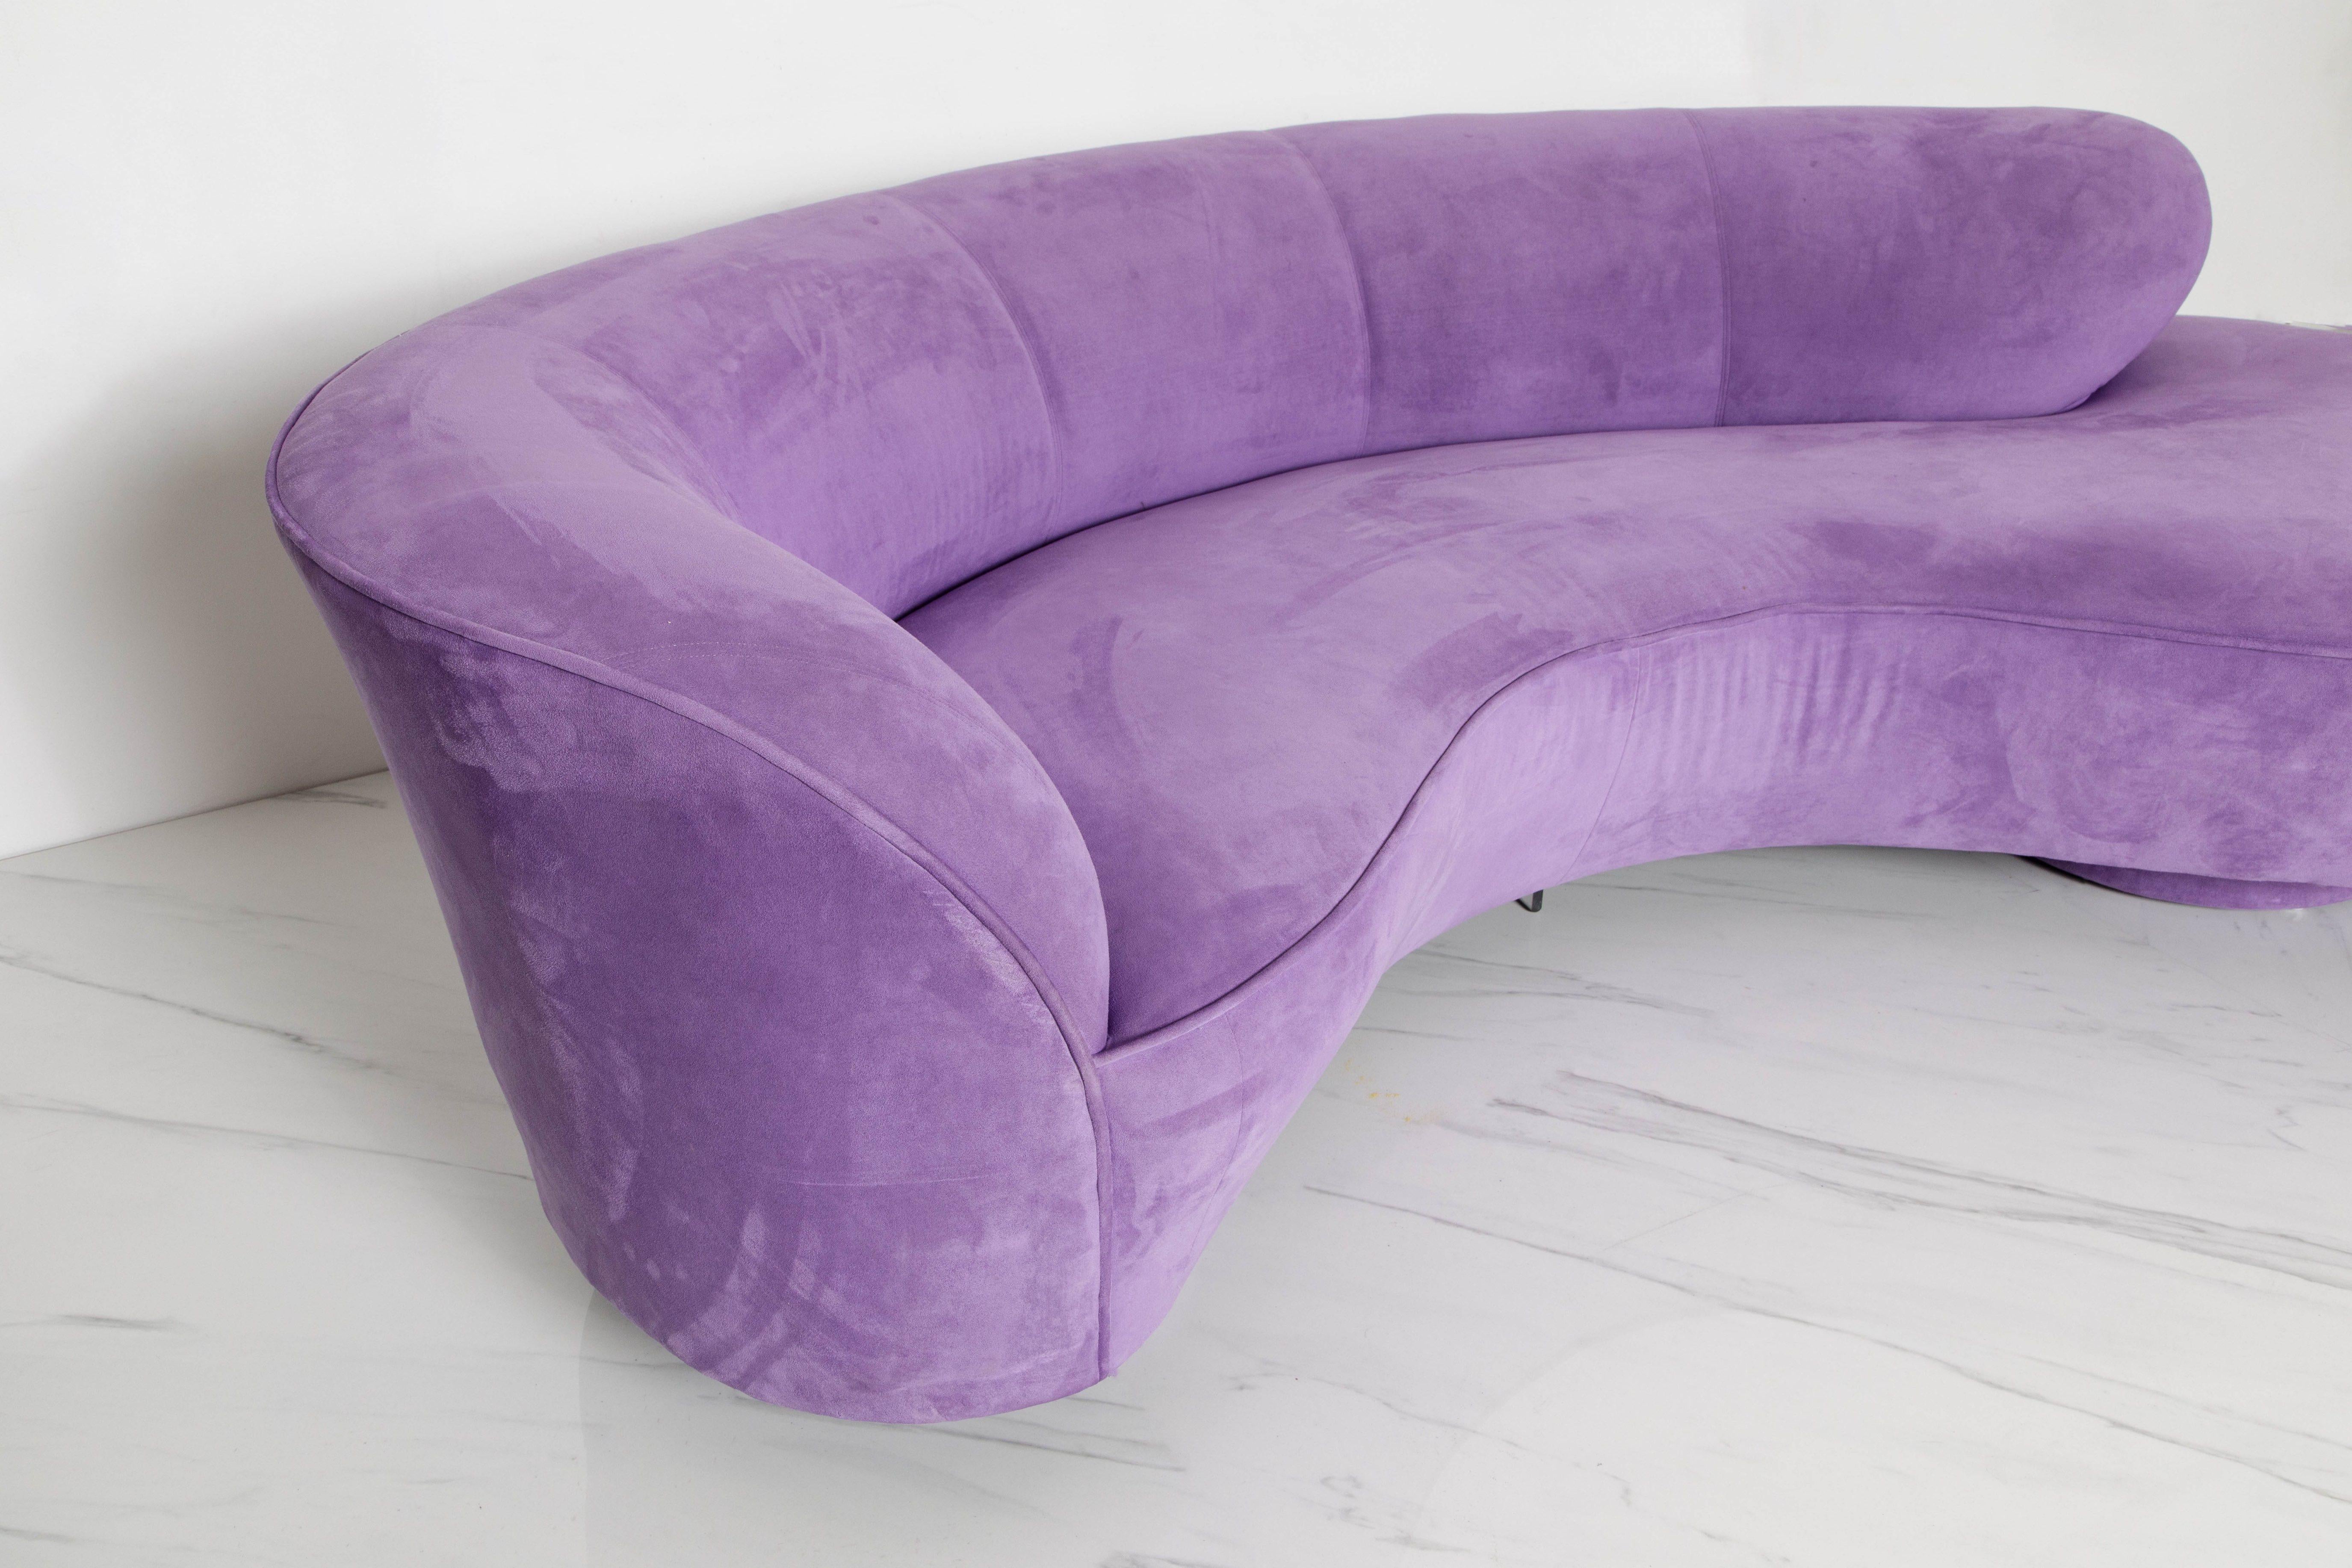 Ultrasuede 'Cloud' Sofa by Vladimir Kagan for Directional w Lucite Leg, 1980s, Signed